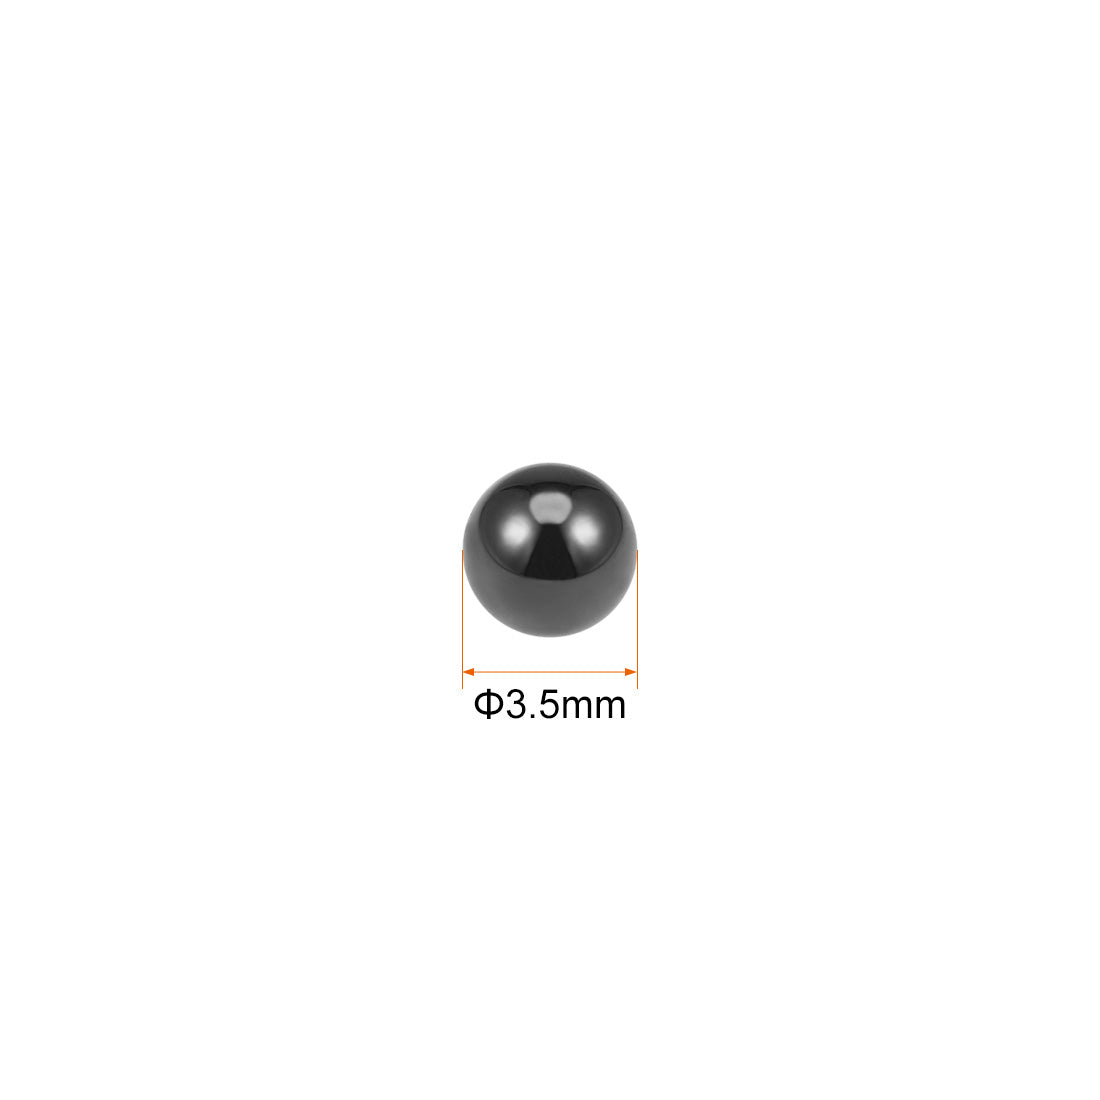 Uxcell Uxcell 1mm Ceramic Bearing Balls, Si3N4 Silicon Nitride Ball G5 Precision 20pcs